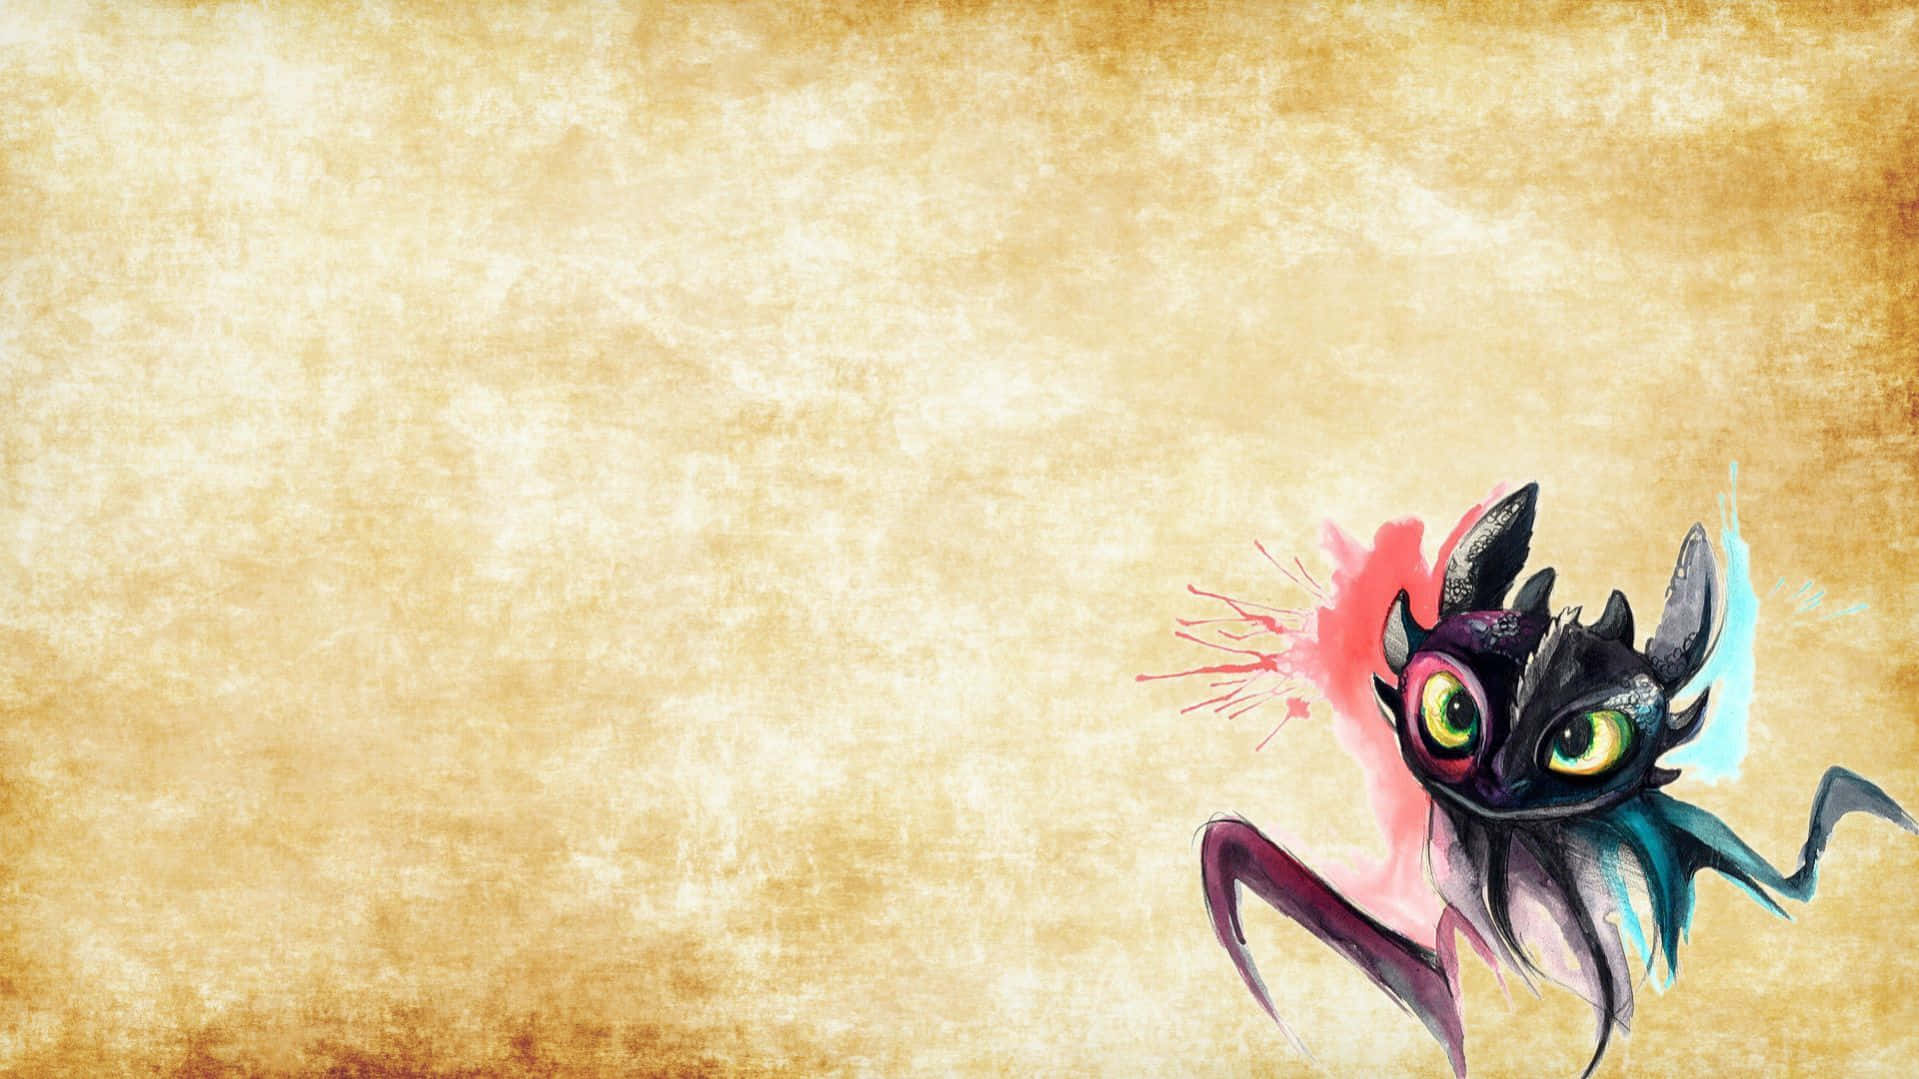 Toothless Dragon Artistic Background Wallpaper